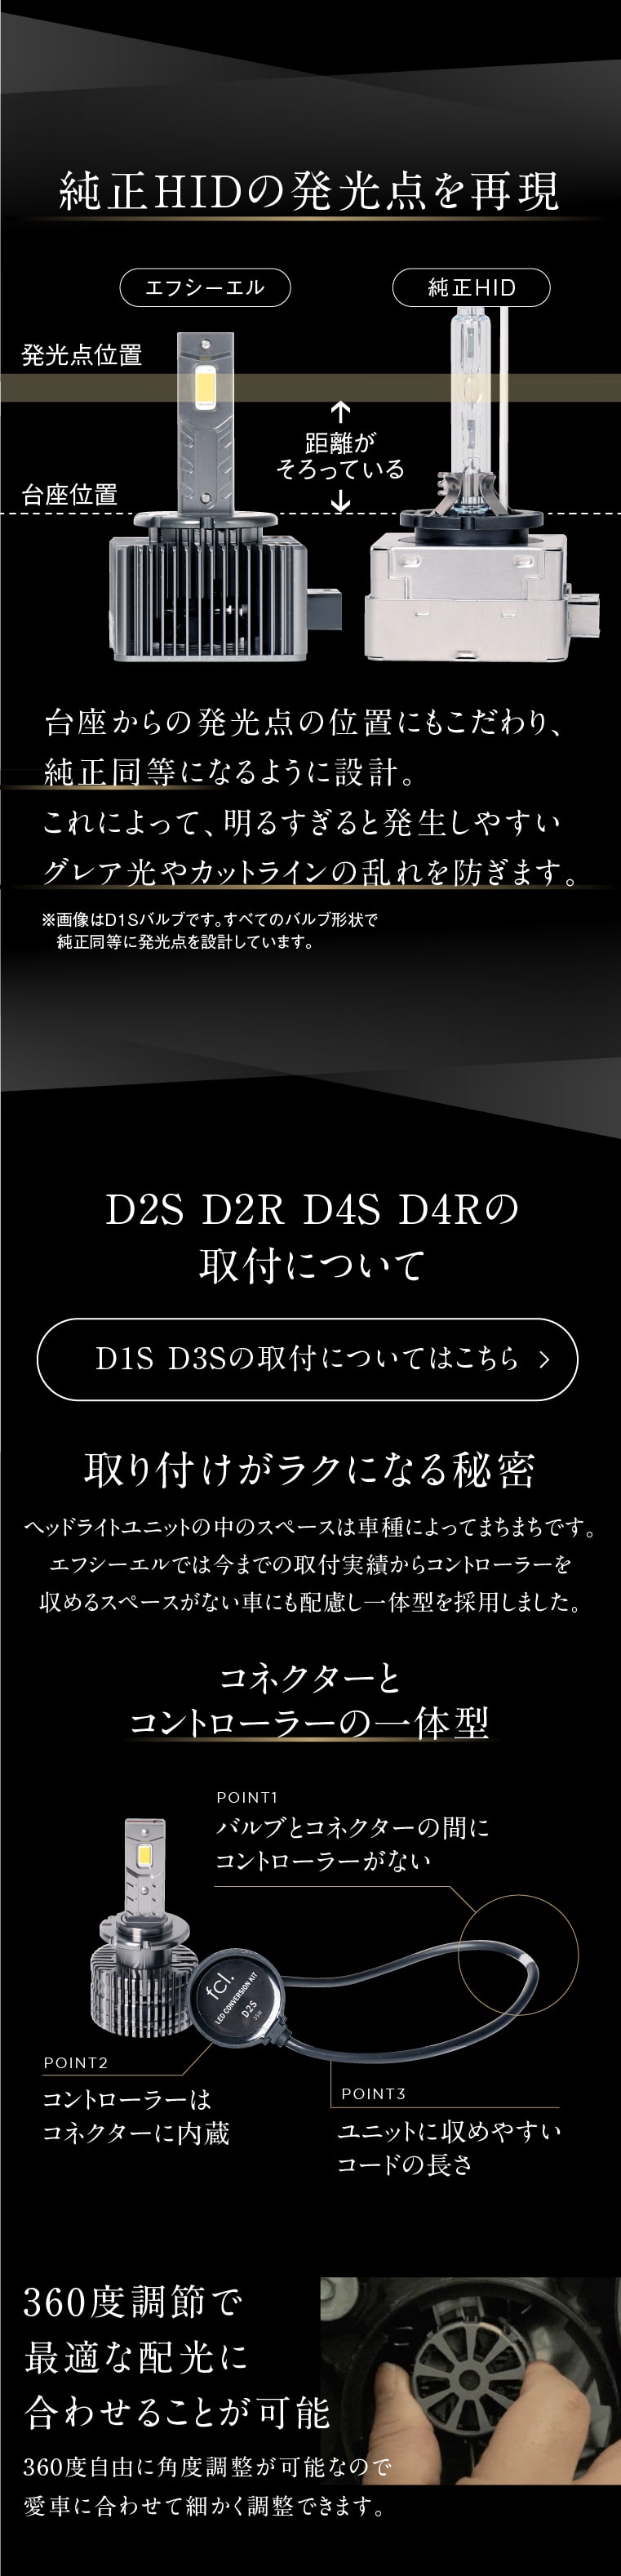 D2S D2R D4S D4R かんたん交換